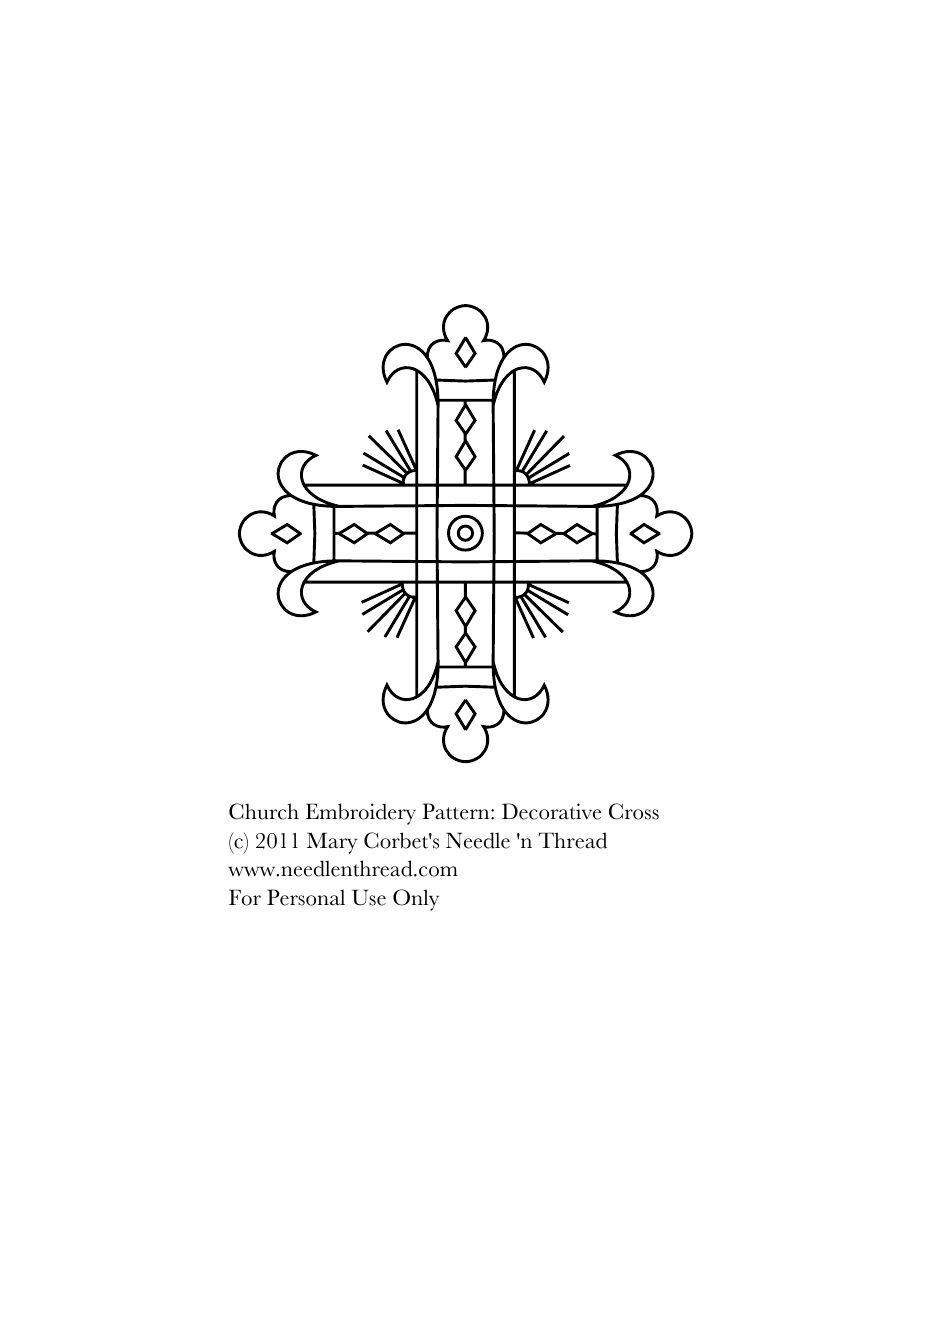 Church Embroidery Pattern Template - Decorative Cross, Page 1